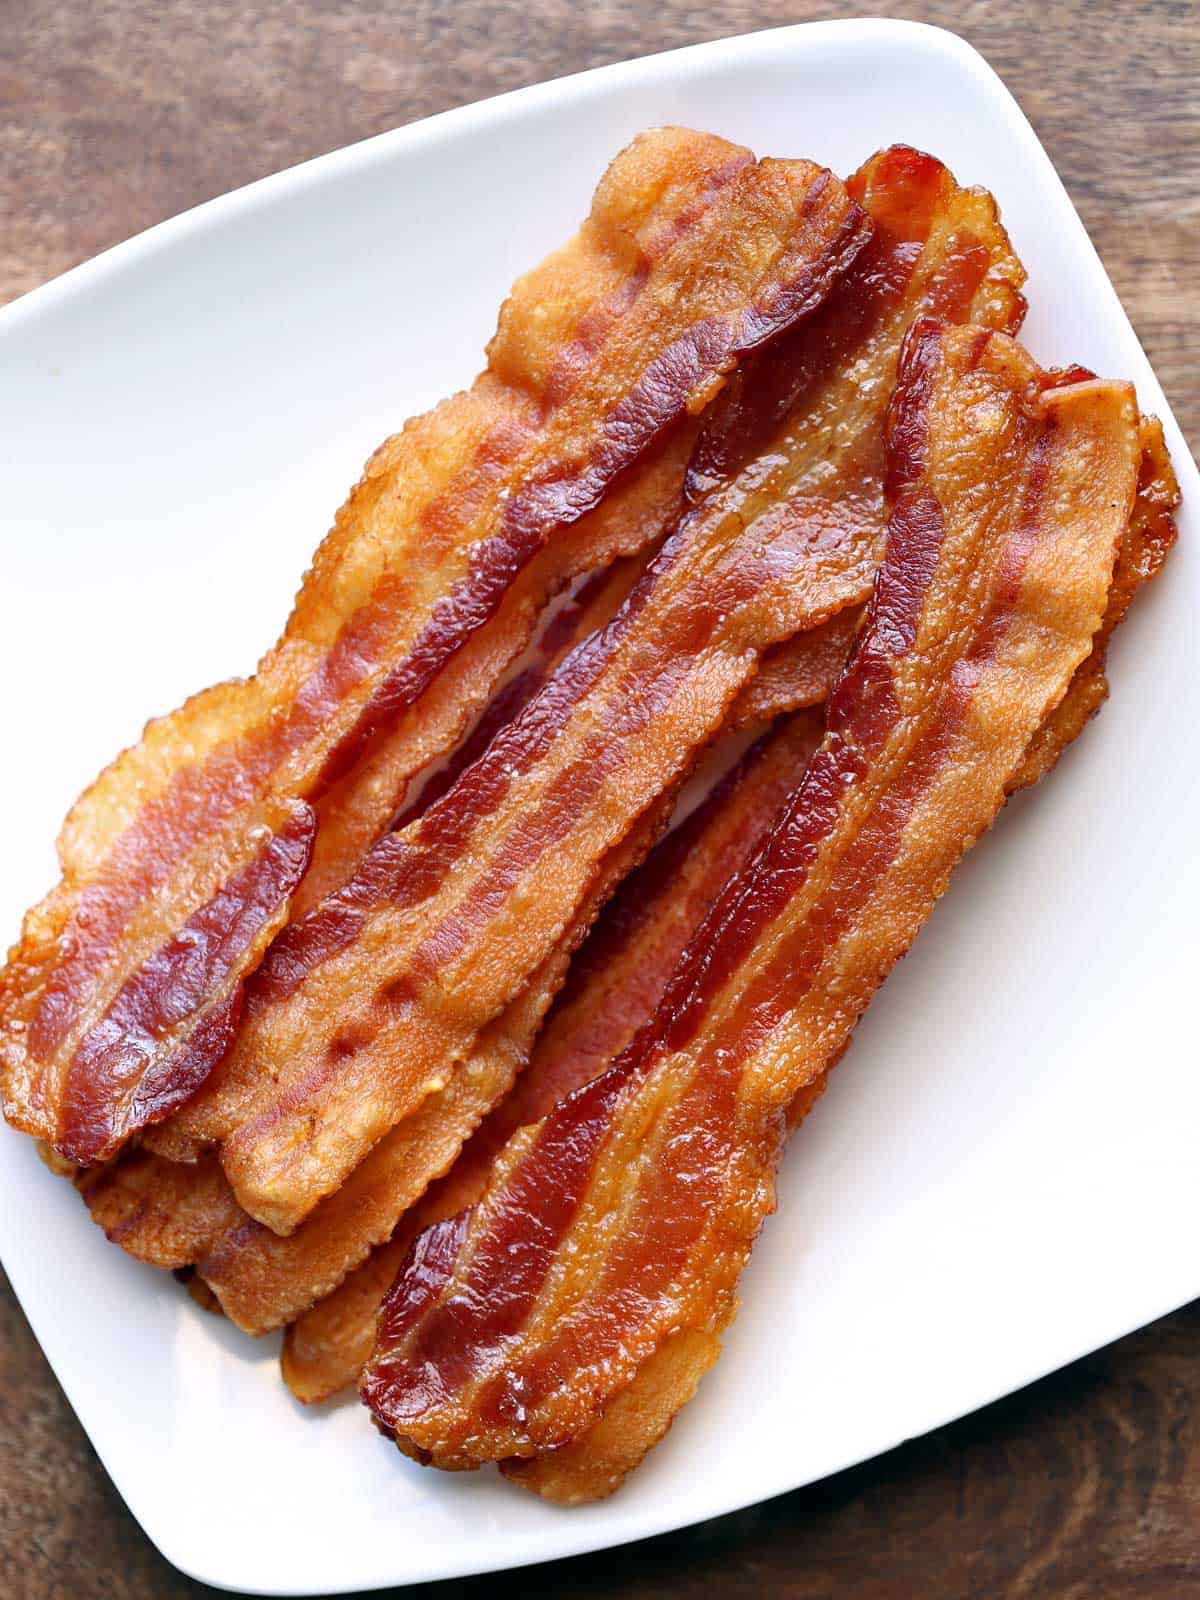 Slices of crispy oven bacon arranged on a white plate.  